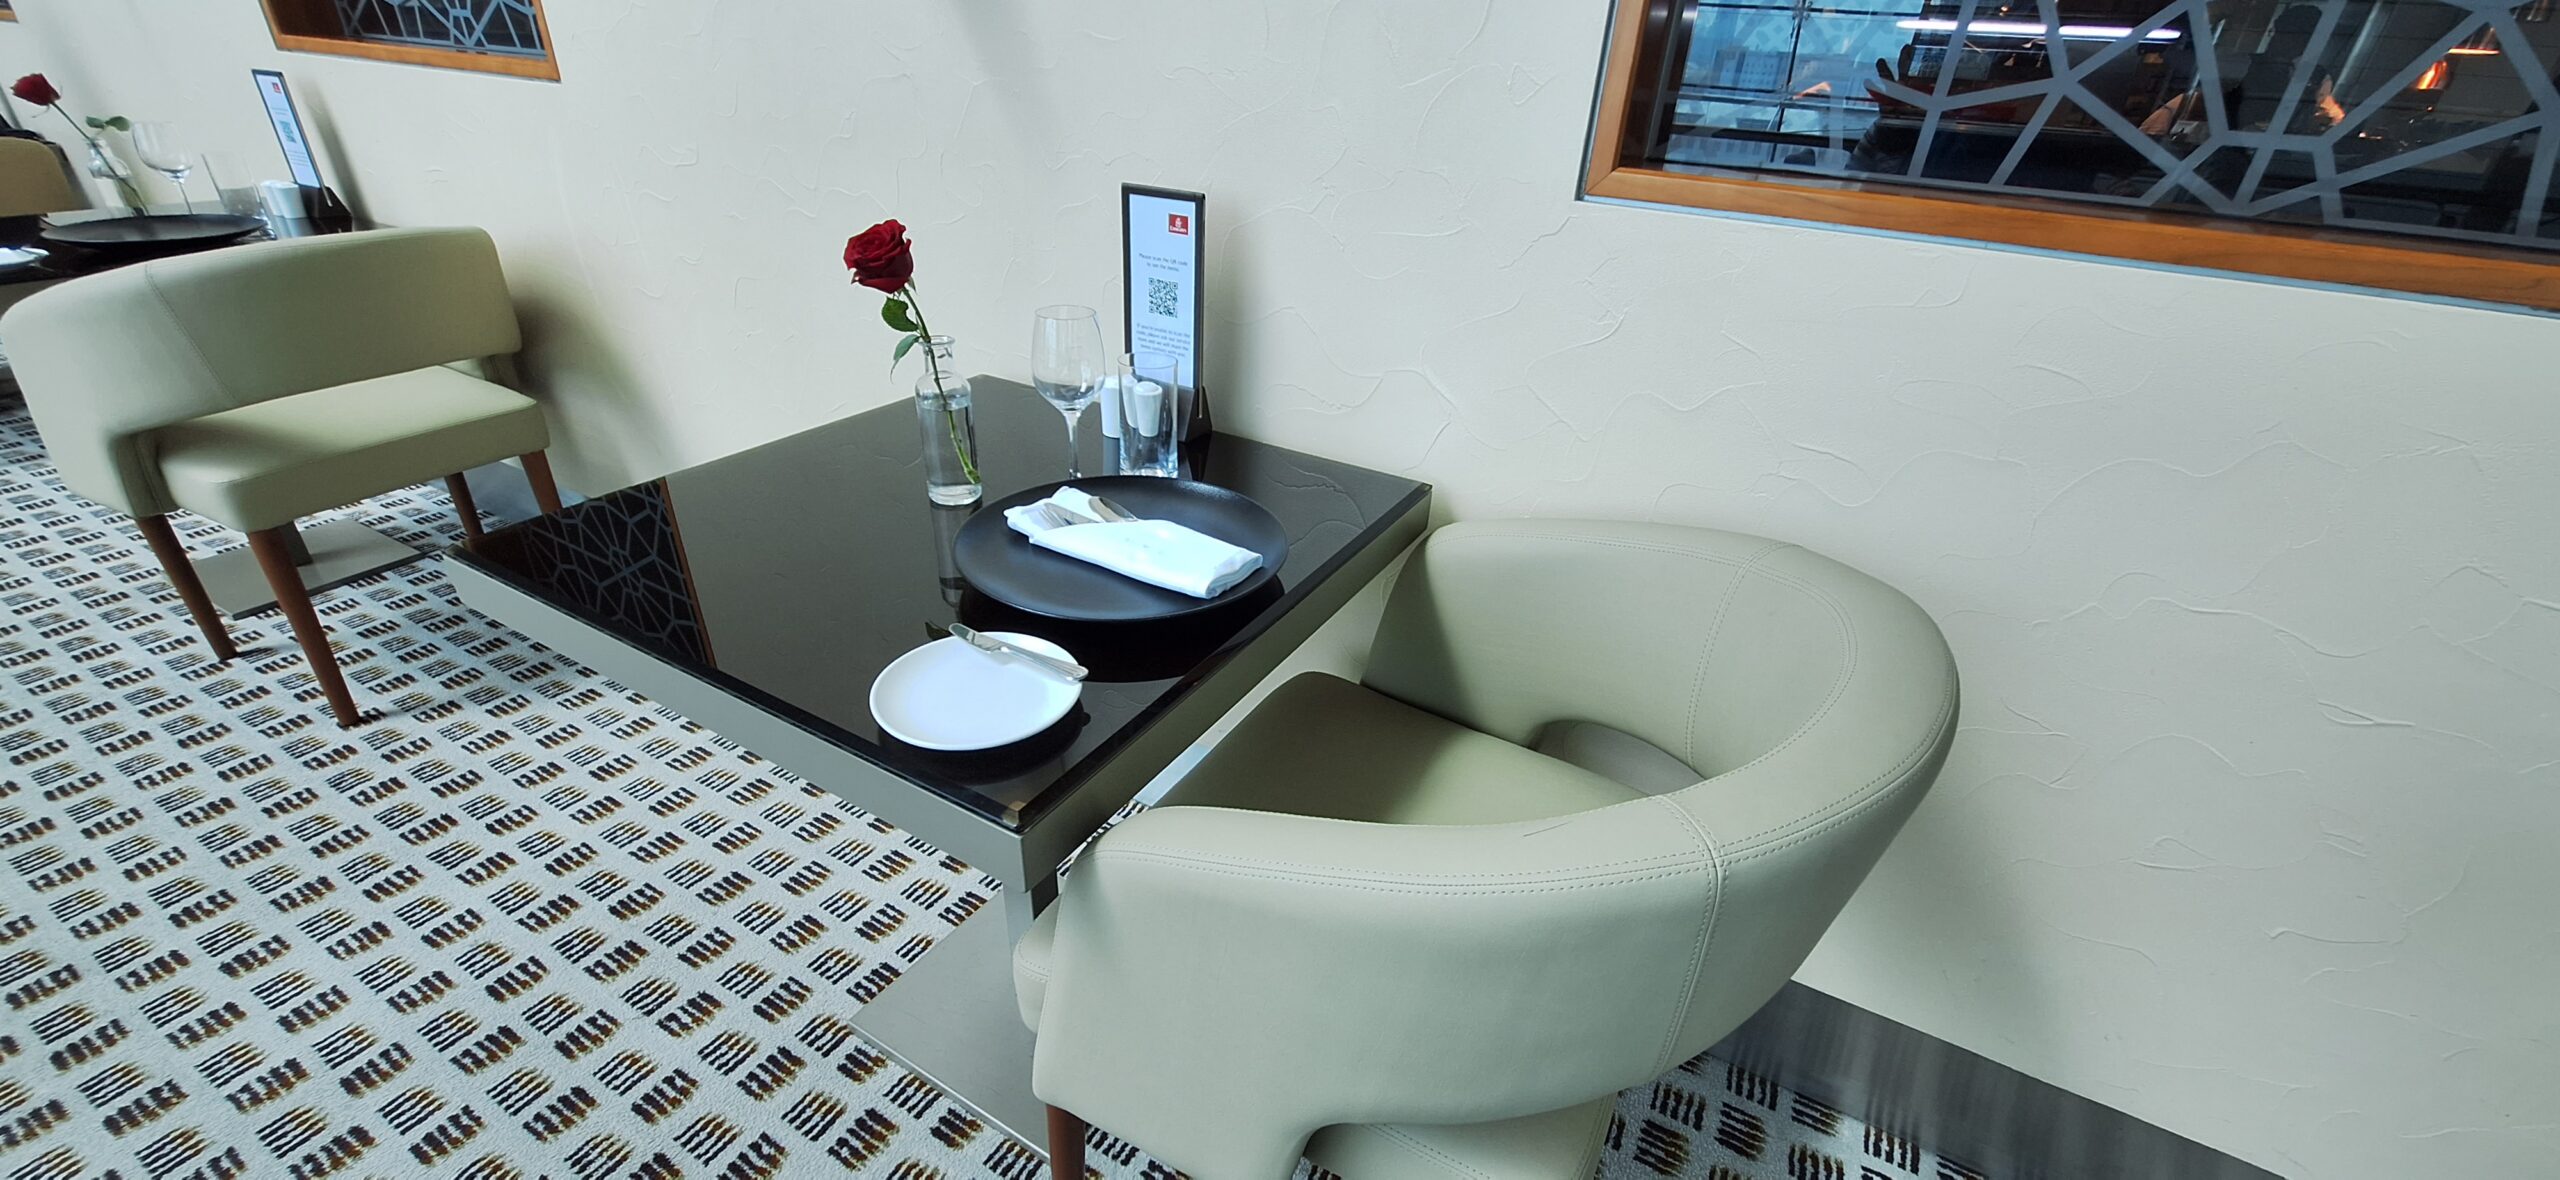 a table with plates and a rose on it